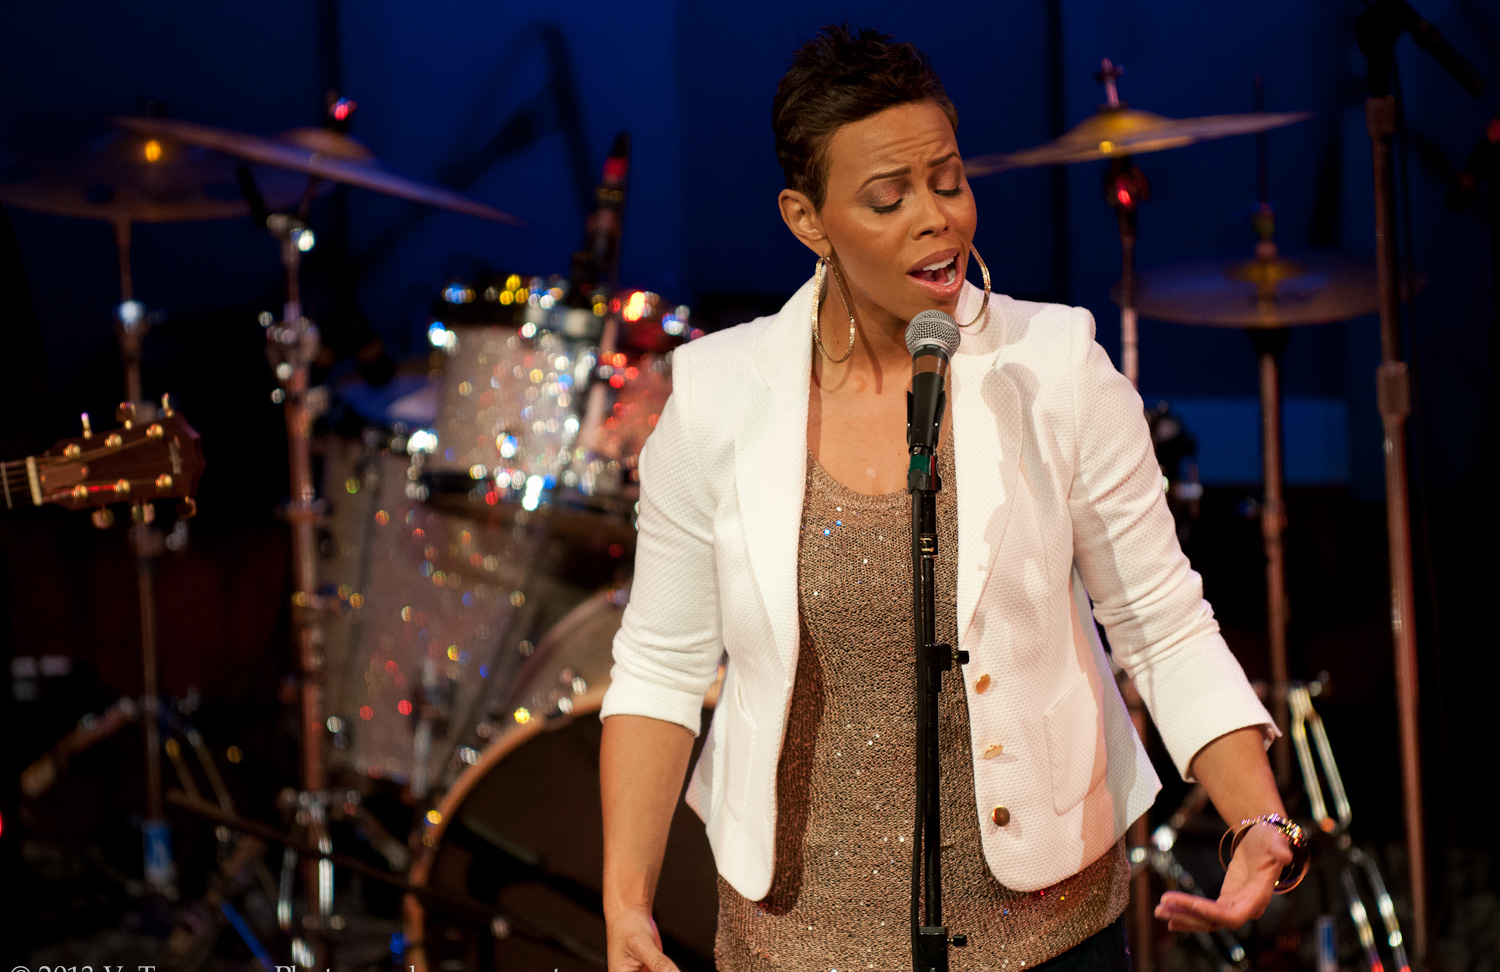 temika-moore-inspirational-soul-and-jazz-world-cafe-live-philly-VTP1071.jpg